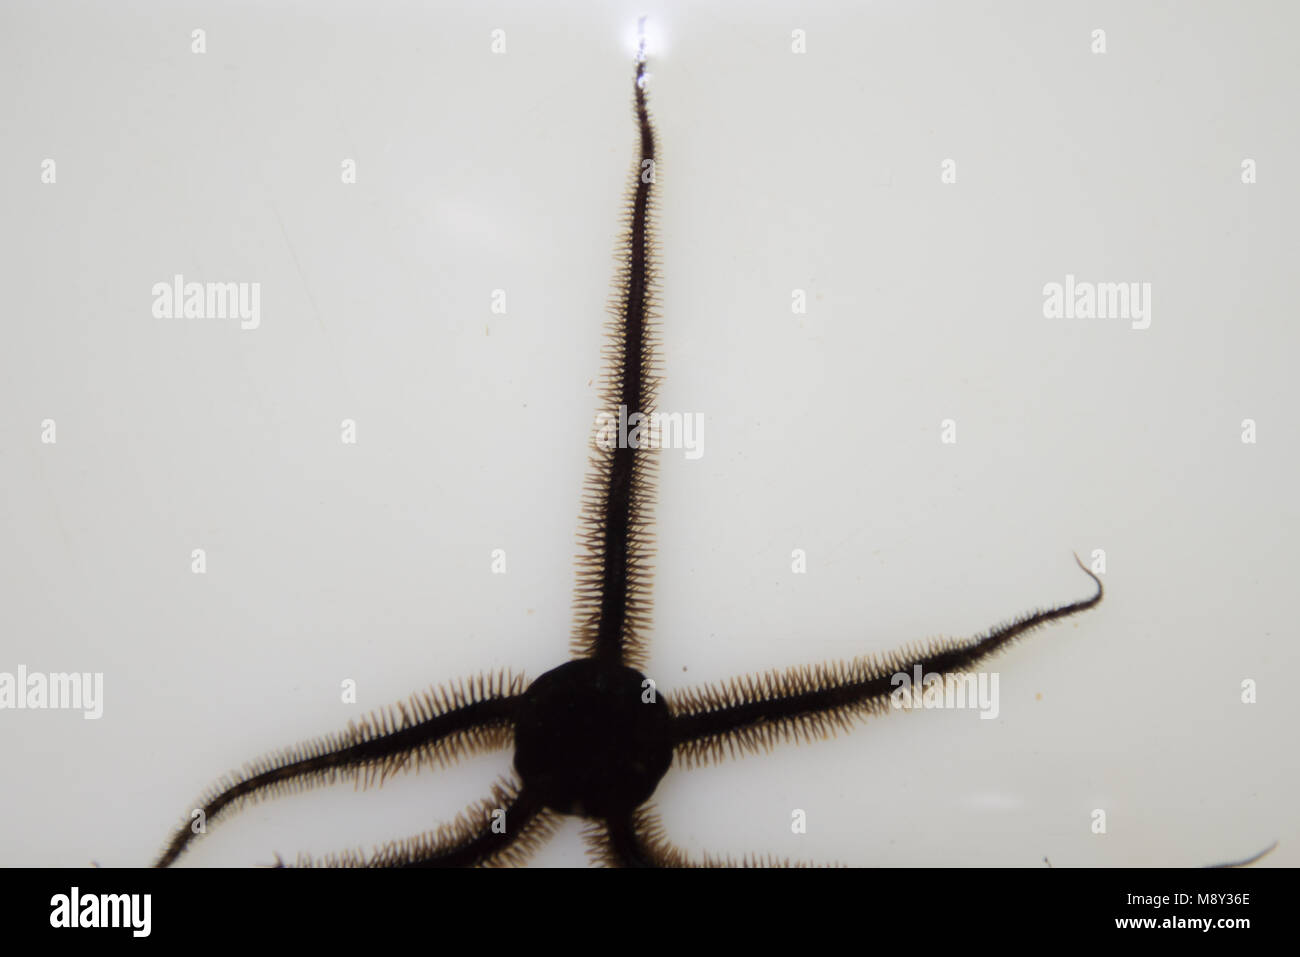 Ophiuroid, black brittle star in front of white background Stock Photo